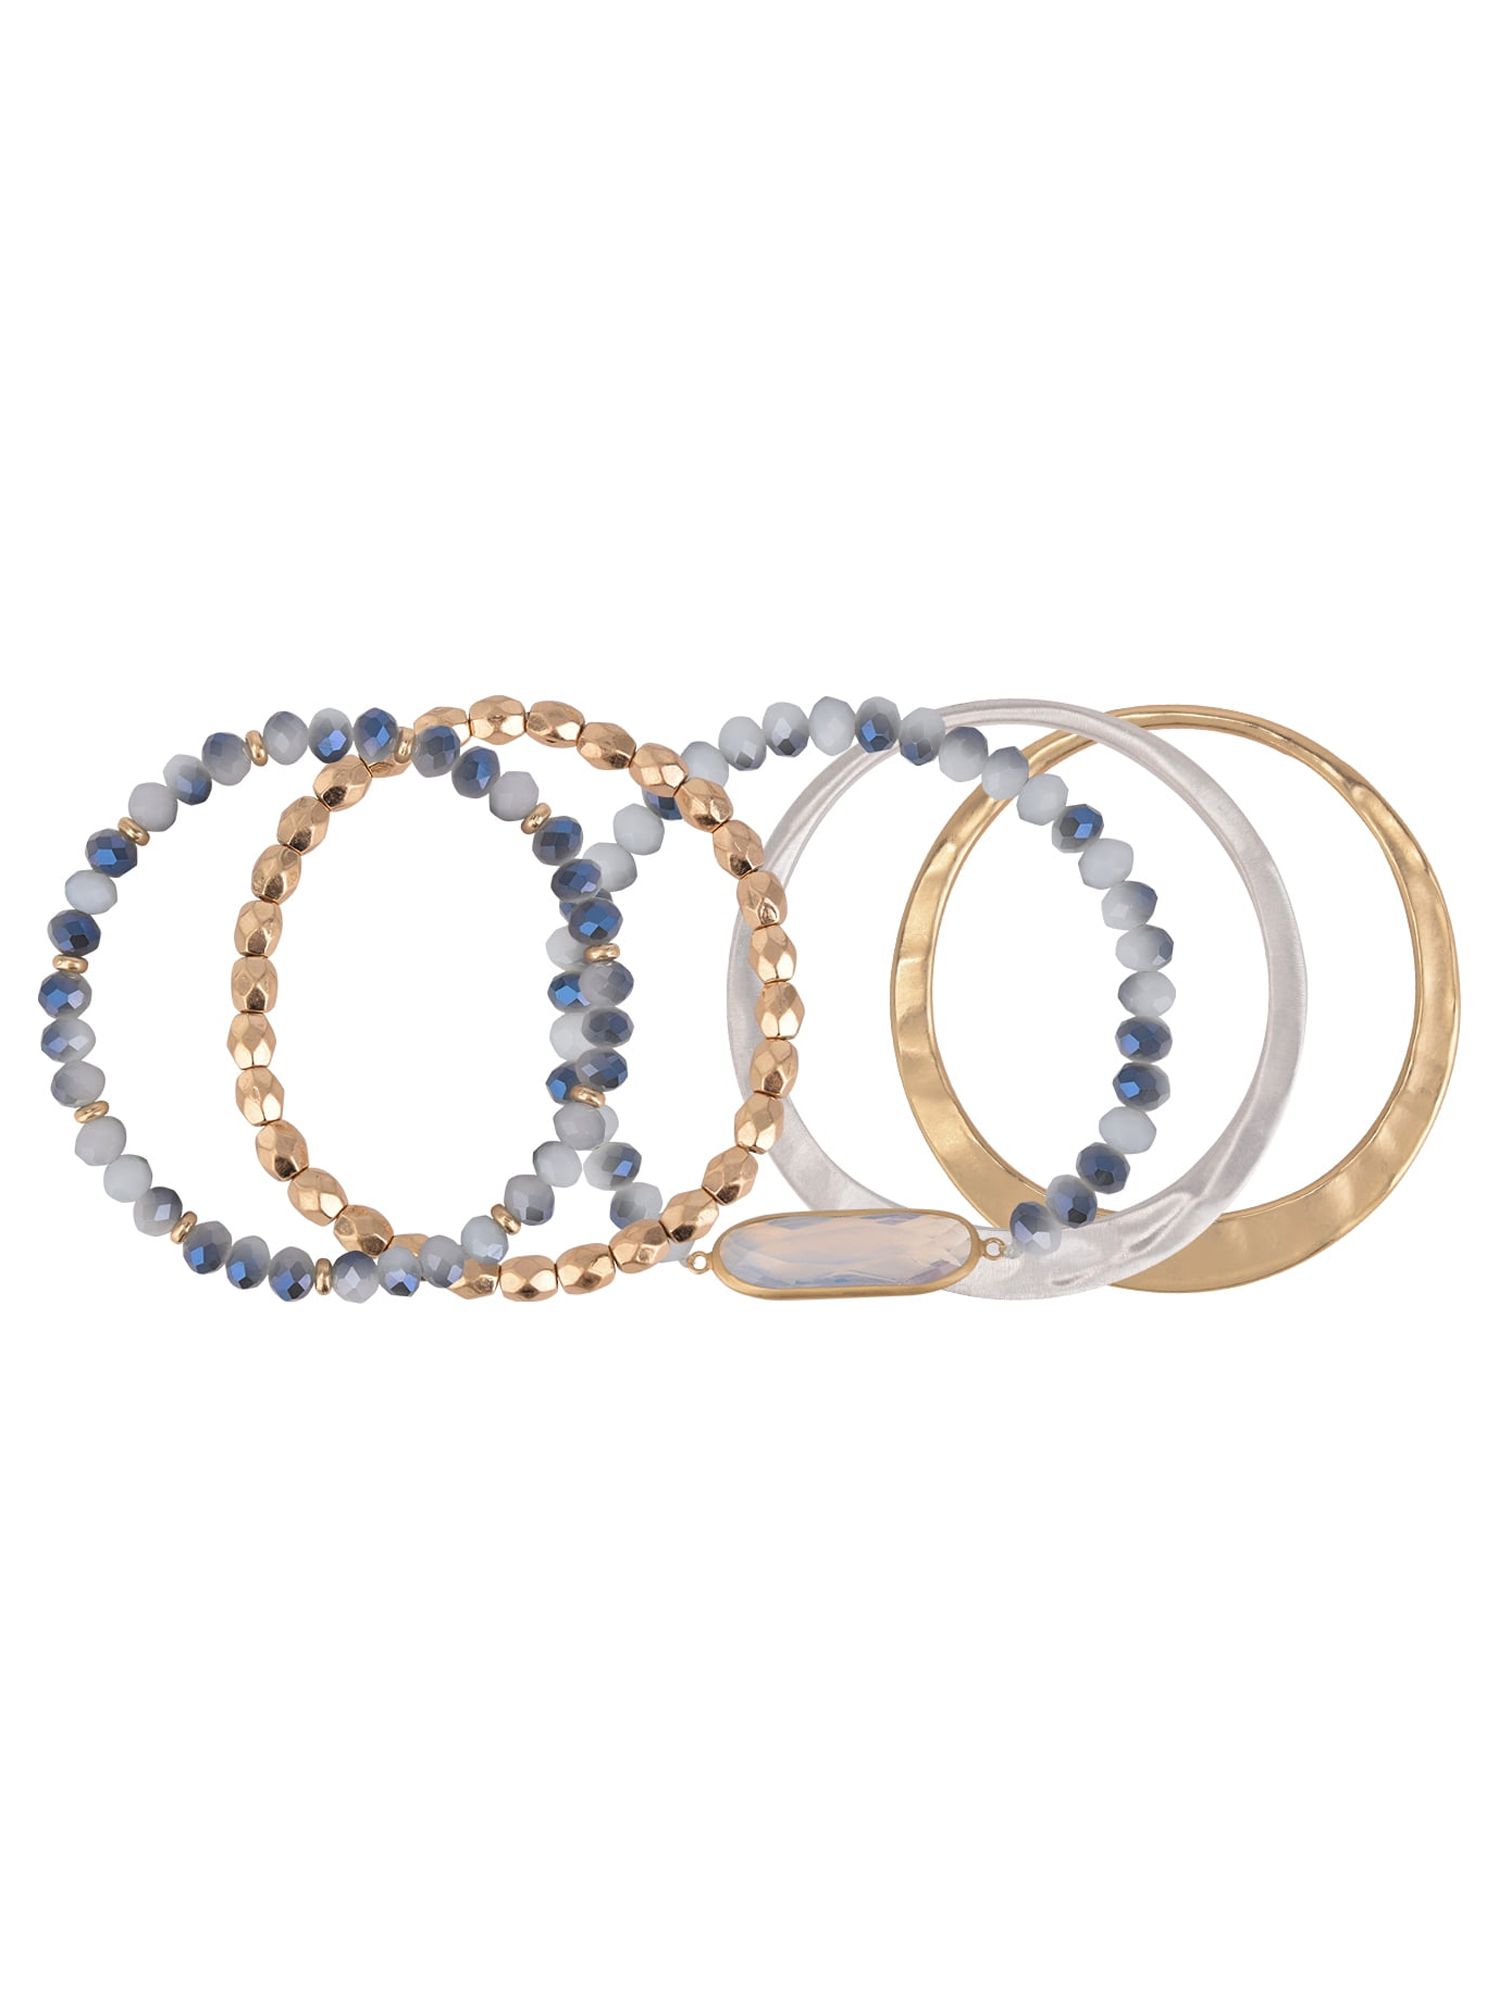 The Pioneer Woman Hammered Gold and Blue Tone Beaded Bangle Bracelet Set, 5 Pack - image 1 of 5